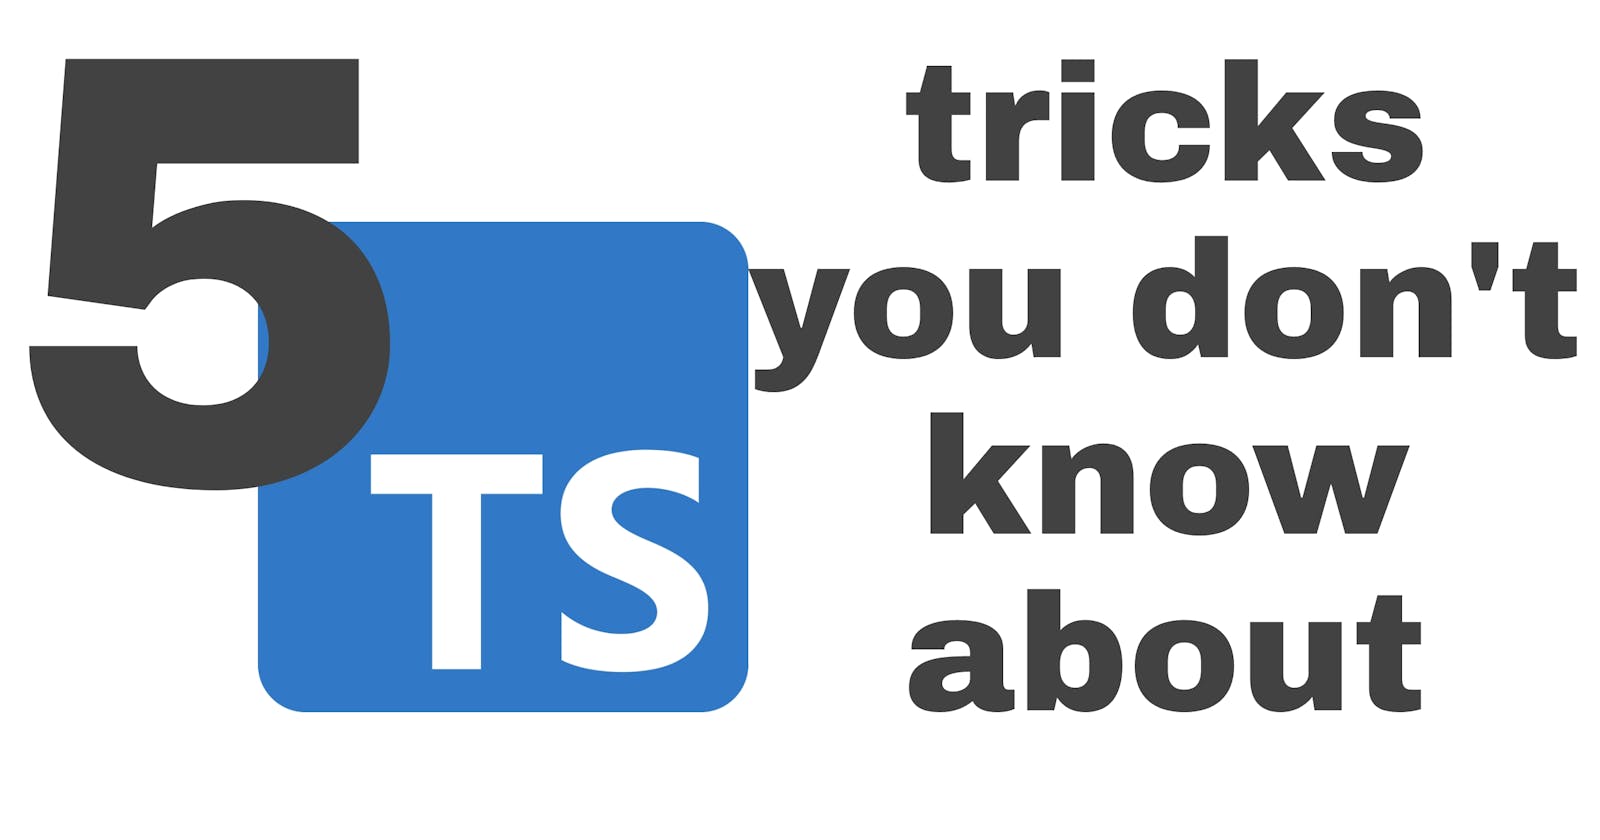 5 TypeScript tricks you don't know about